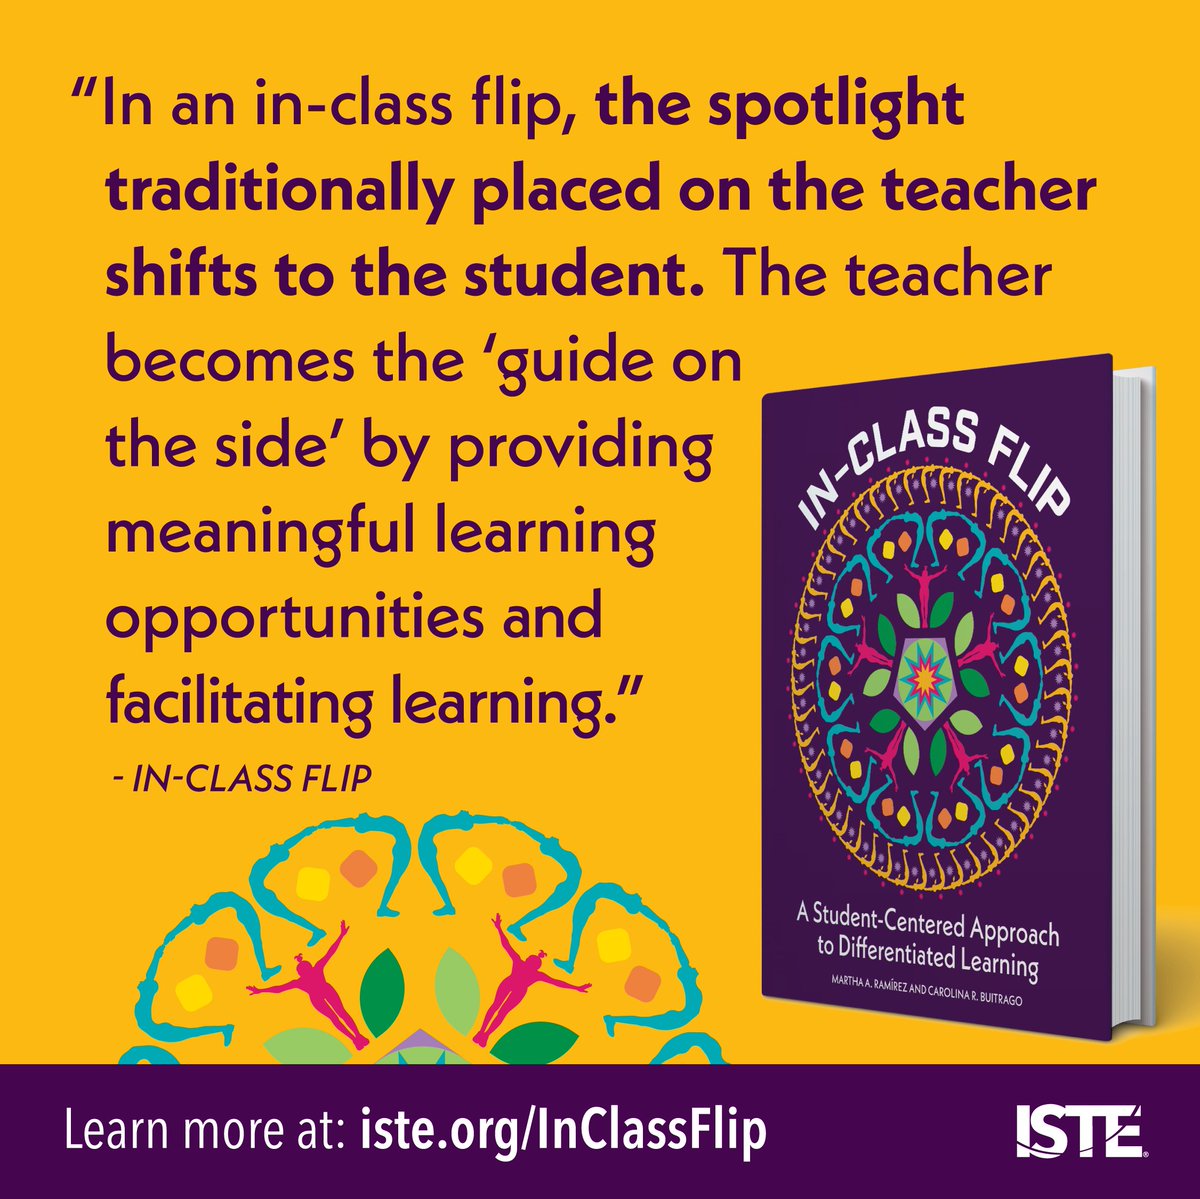 As an avid reader, I've always wanted to connect with authors, pick their brains, and learn beyond the book. So as an author, I'd like to create a space to talk about In-Class Flip. Would you be interested? If so, all ideas are welcome! #InClassFlip #ISTEauthor #BookDiscussions